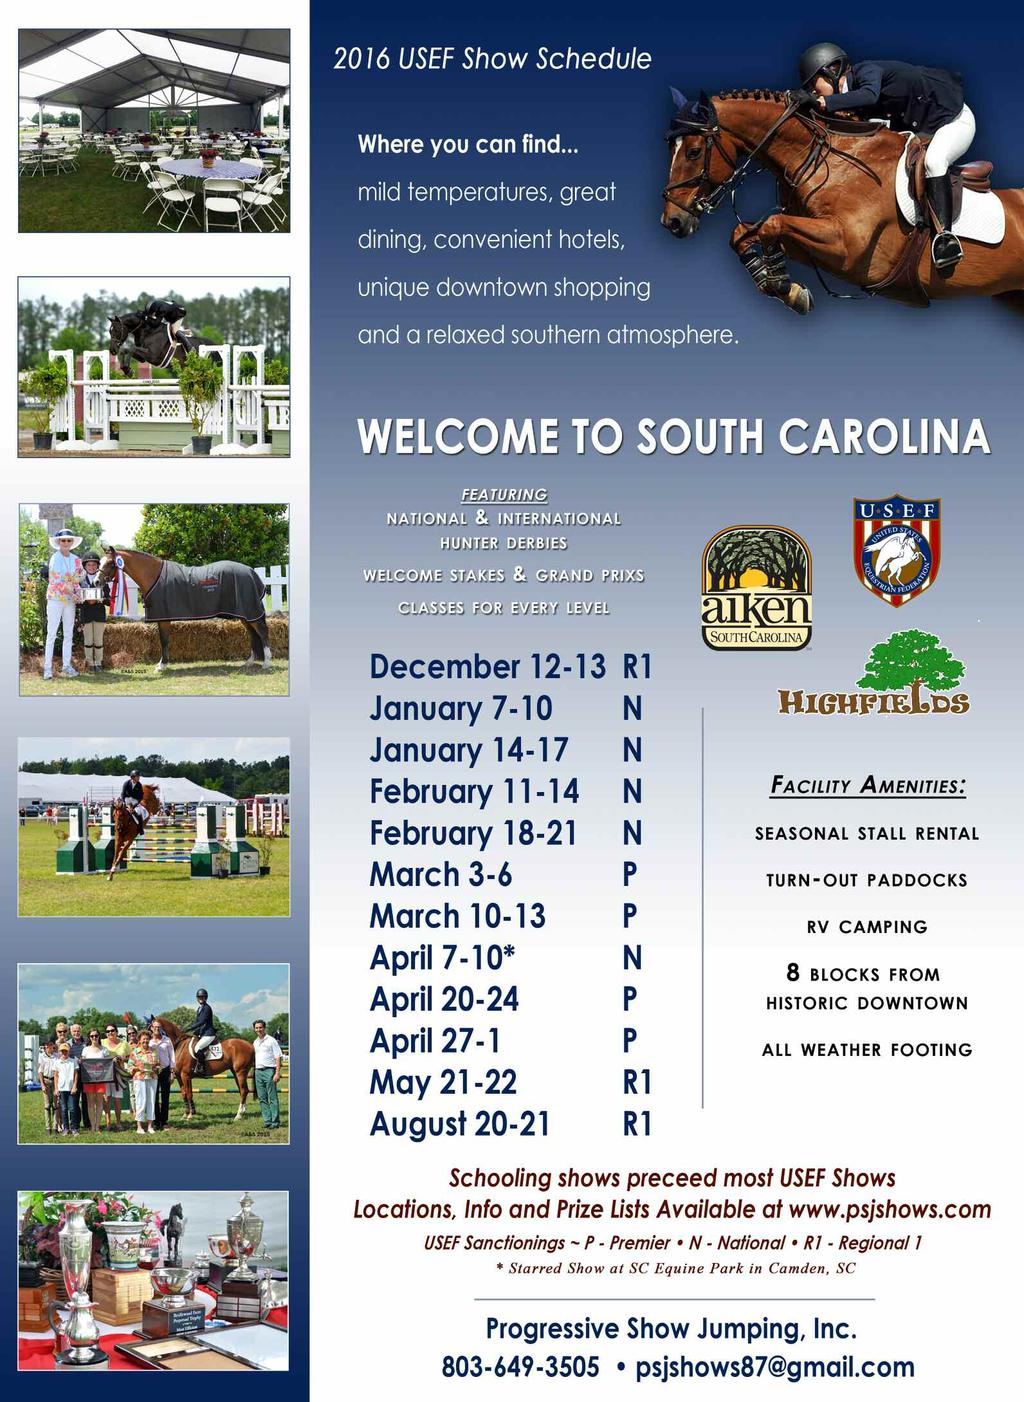 Class Fees n/c Finals $20.00 per class/htr and eq $14.00 per class W-T, W-T-C $20.00 Medals n/c Leadline $35.00 Jumper & Performance Classes ($20 paid back in add back money) Stalls & Other Fees $90.